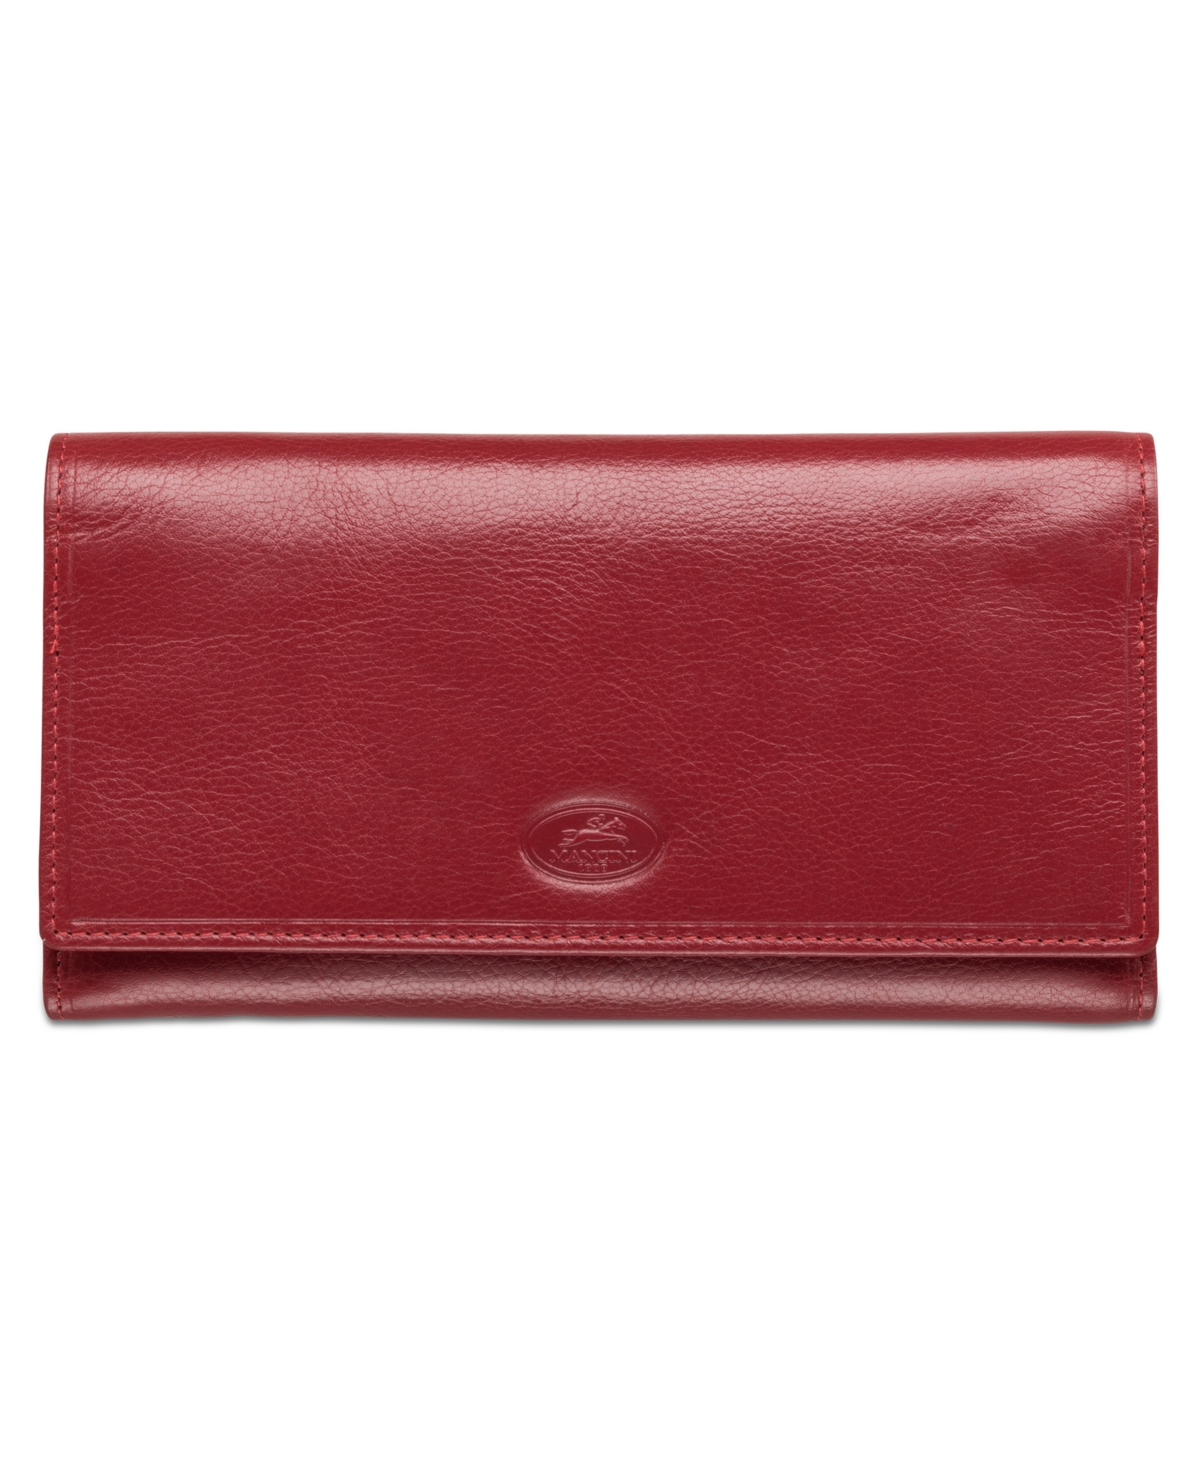 Mancini Equestrian-2 Collection Rfid Secure Trifold Checkbook Wallet